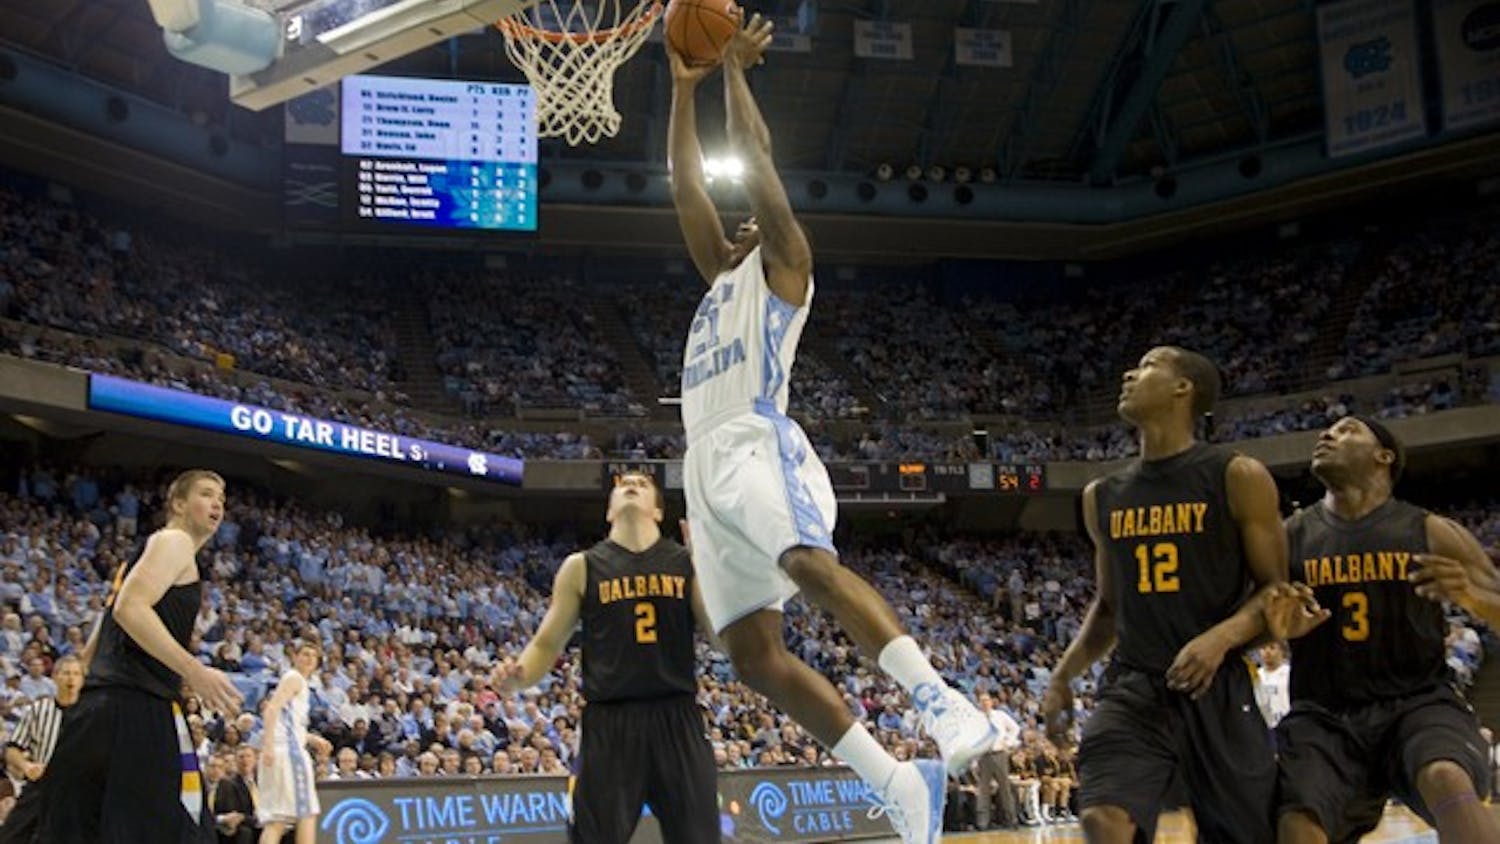 ... on Wednesday, Dec 30, 2009 in the Dean E. Smith Center in Chapel Hill, N.C.